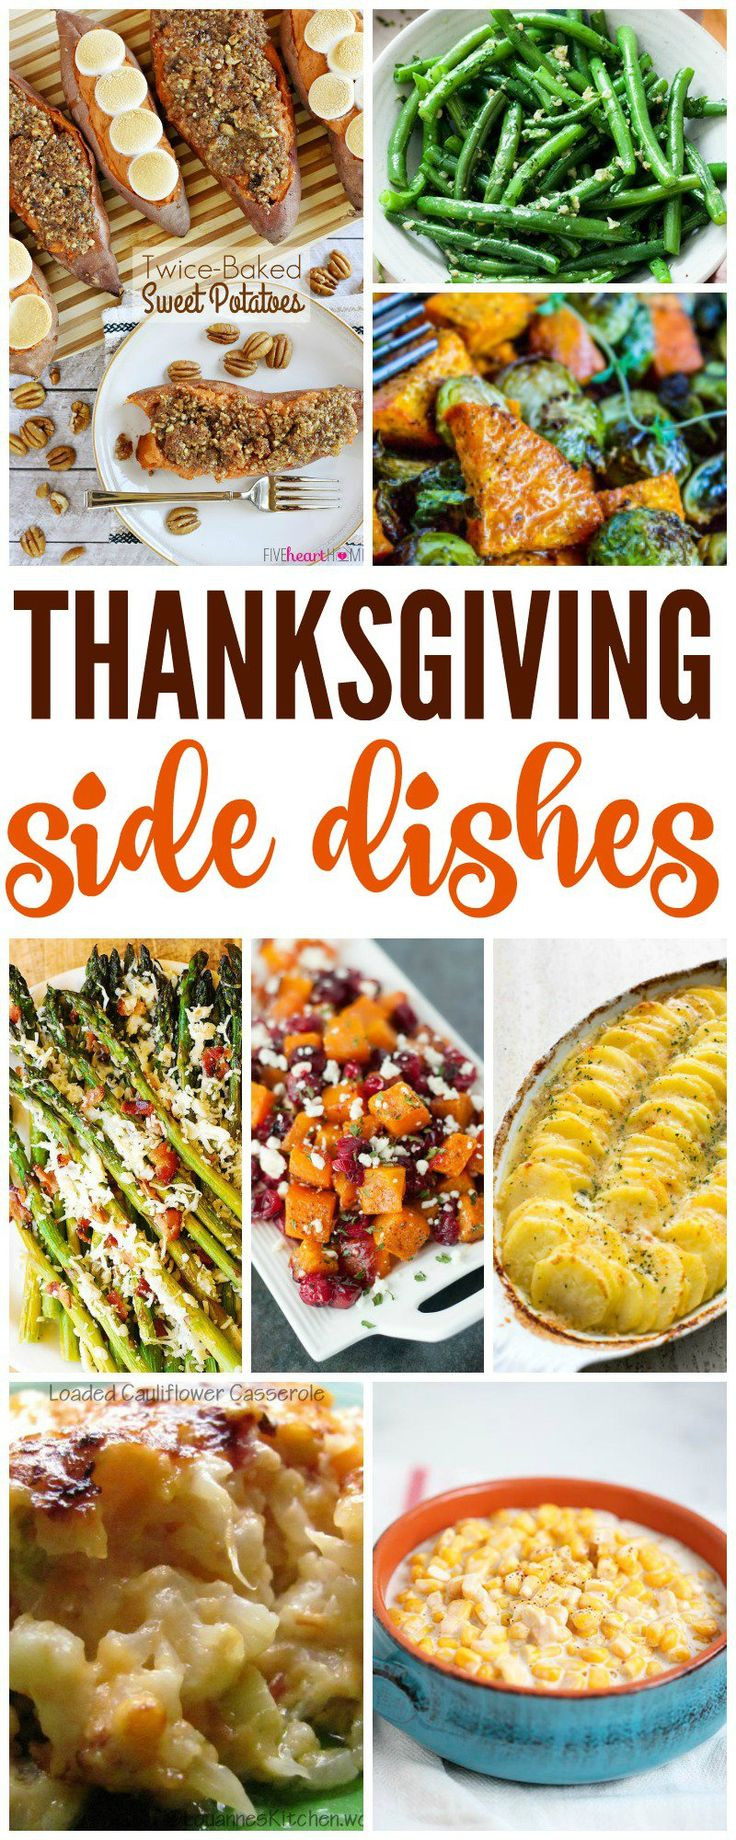 Non Traditional Thanksgiving Side Dishes
 Best 25 Traditional thanksgiving recipes ideas on